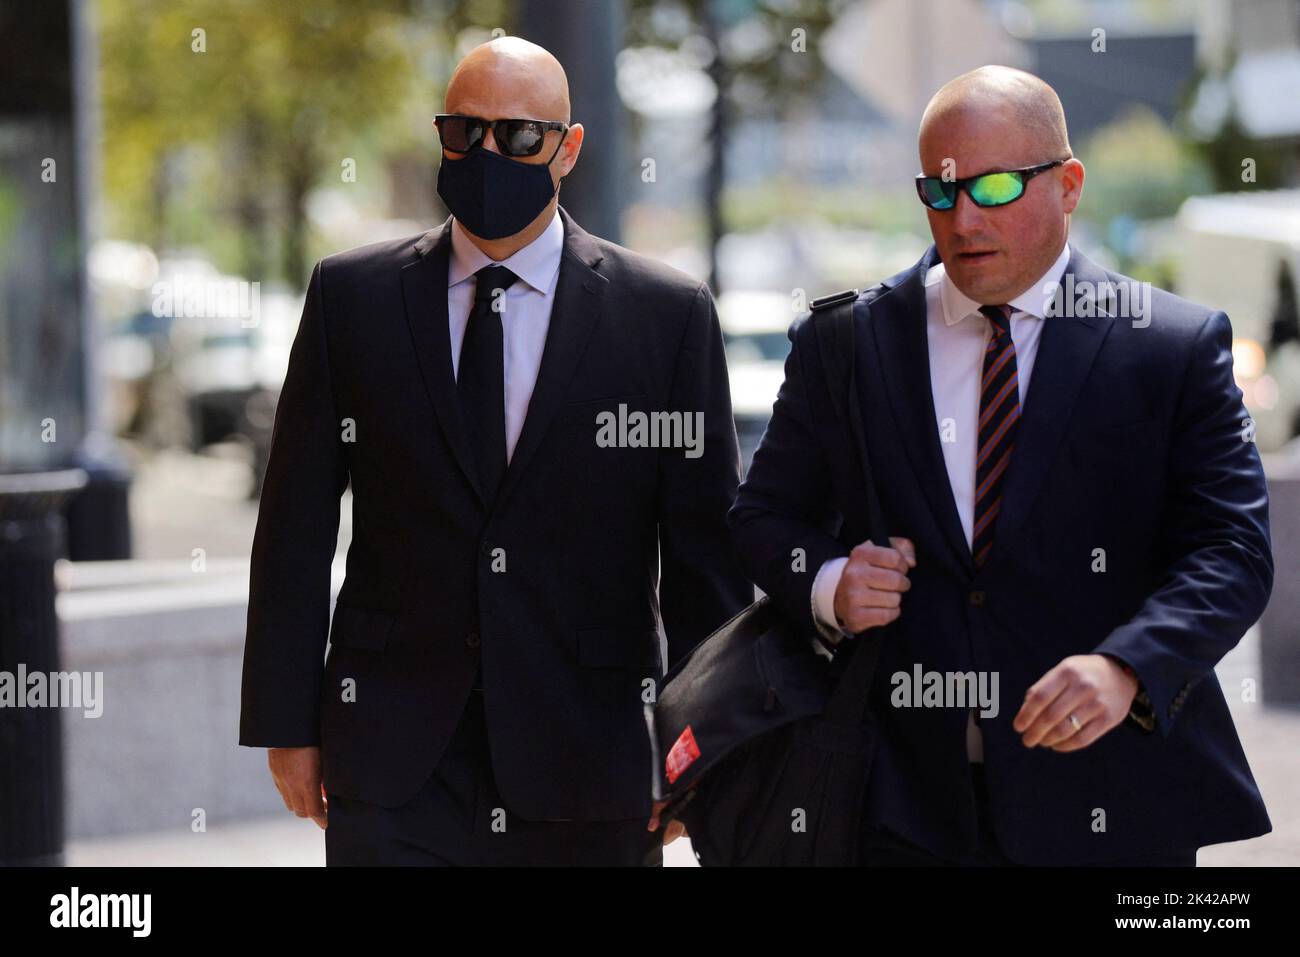 Former eBay Inc director of global resiliency David Harville, with his attorney Peter K. Levitt, arrives at the federal courthouse to be sentenced after pleading guilty for orchestrating a crusade to harass a Massachusetts couple with threats and disturbing home deliveries after their online newsletter angered the company's then-CEO, in Boston, Massachusetts, U.S., September 29, 2022.     REUTERS/Brian Snyder Stock Photo